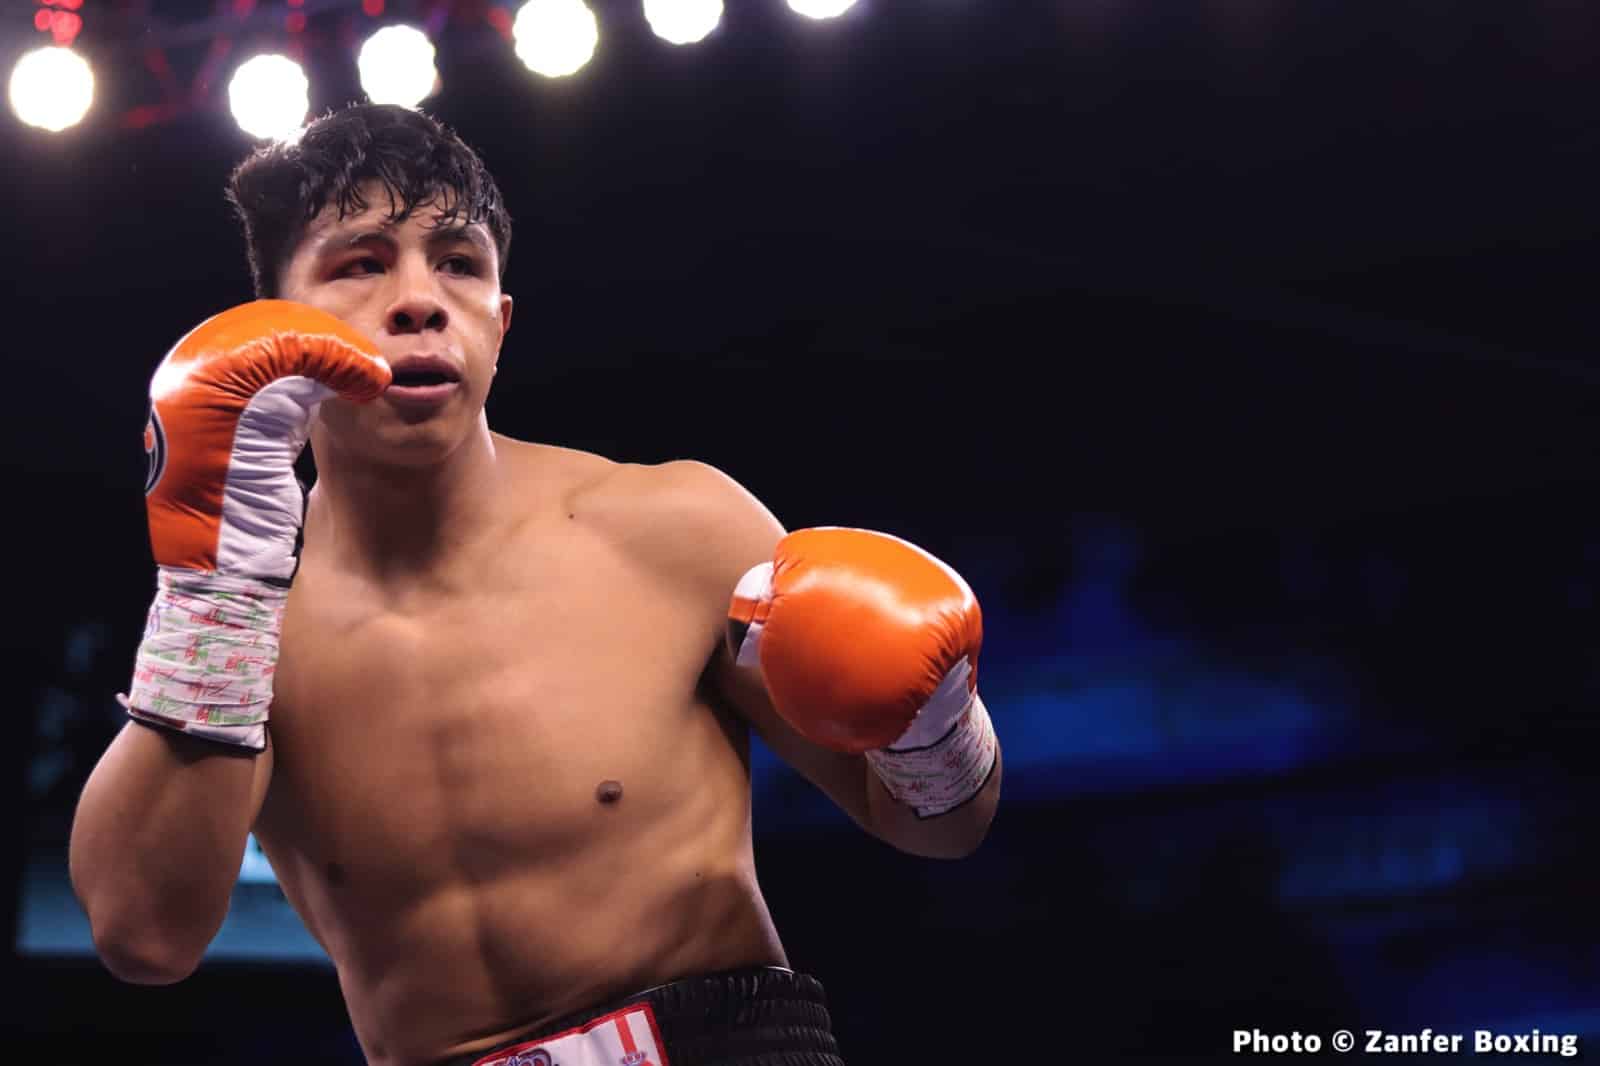 Jaime Munguia stops Gonzalo Coria in 3rd - Boxing Results